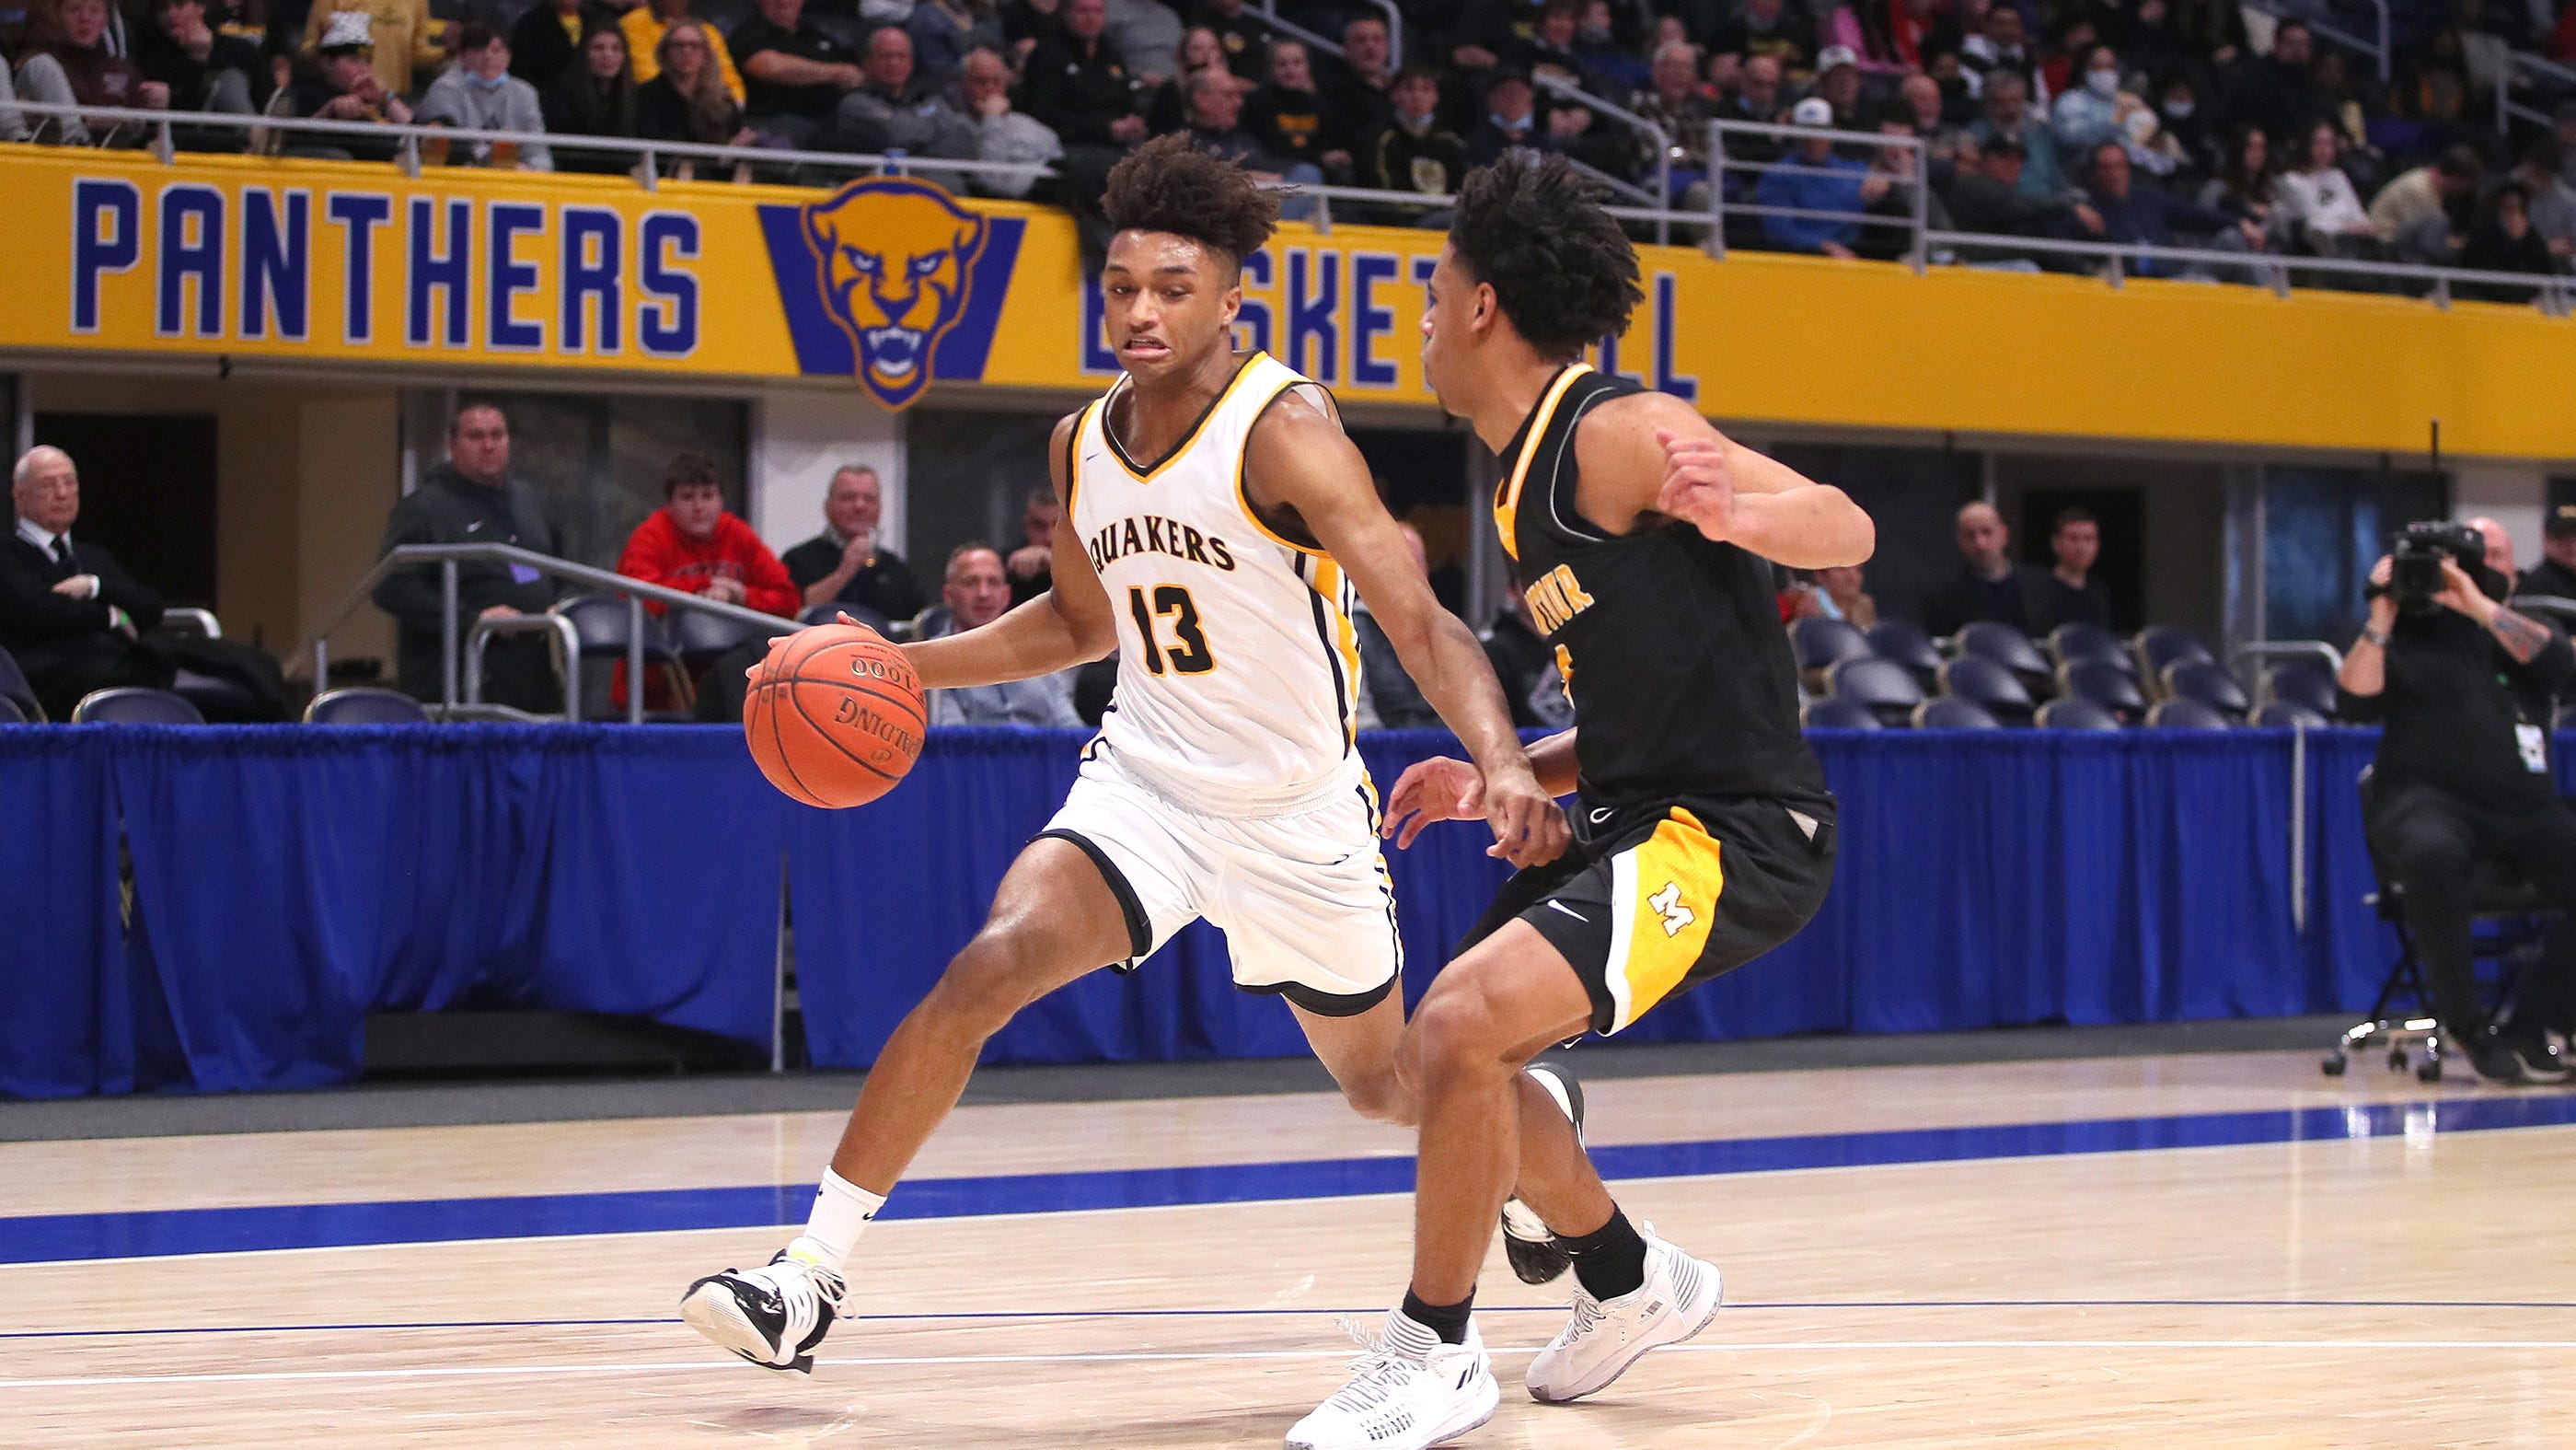 PIAA basketball playoffs Previewing the boys firstround matchups